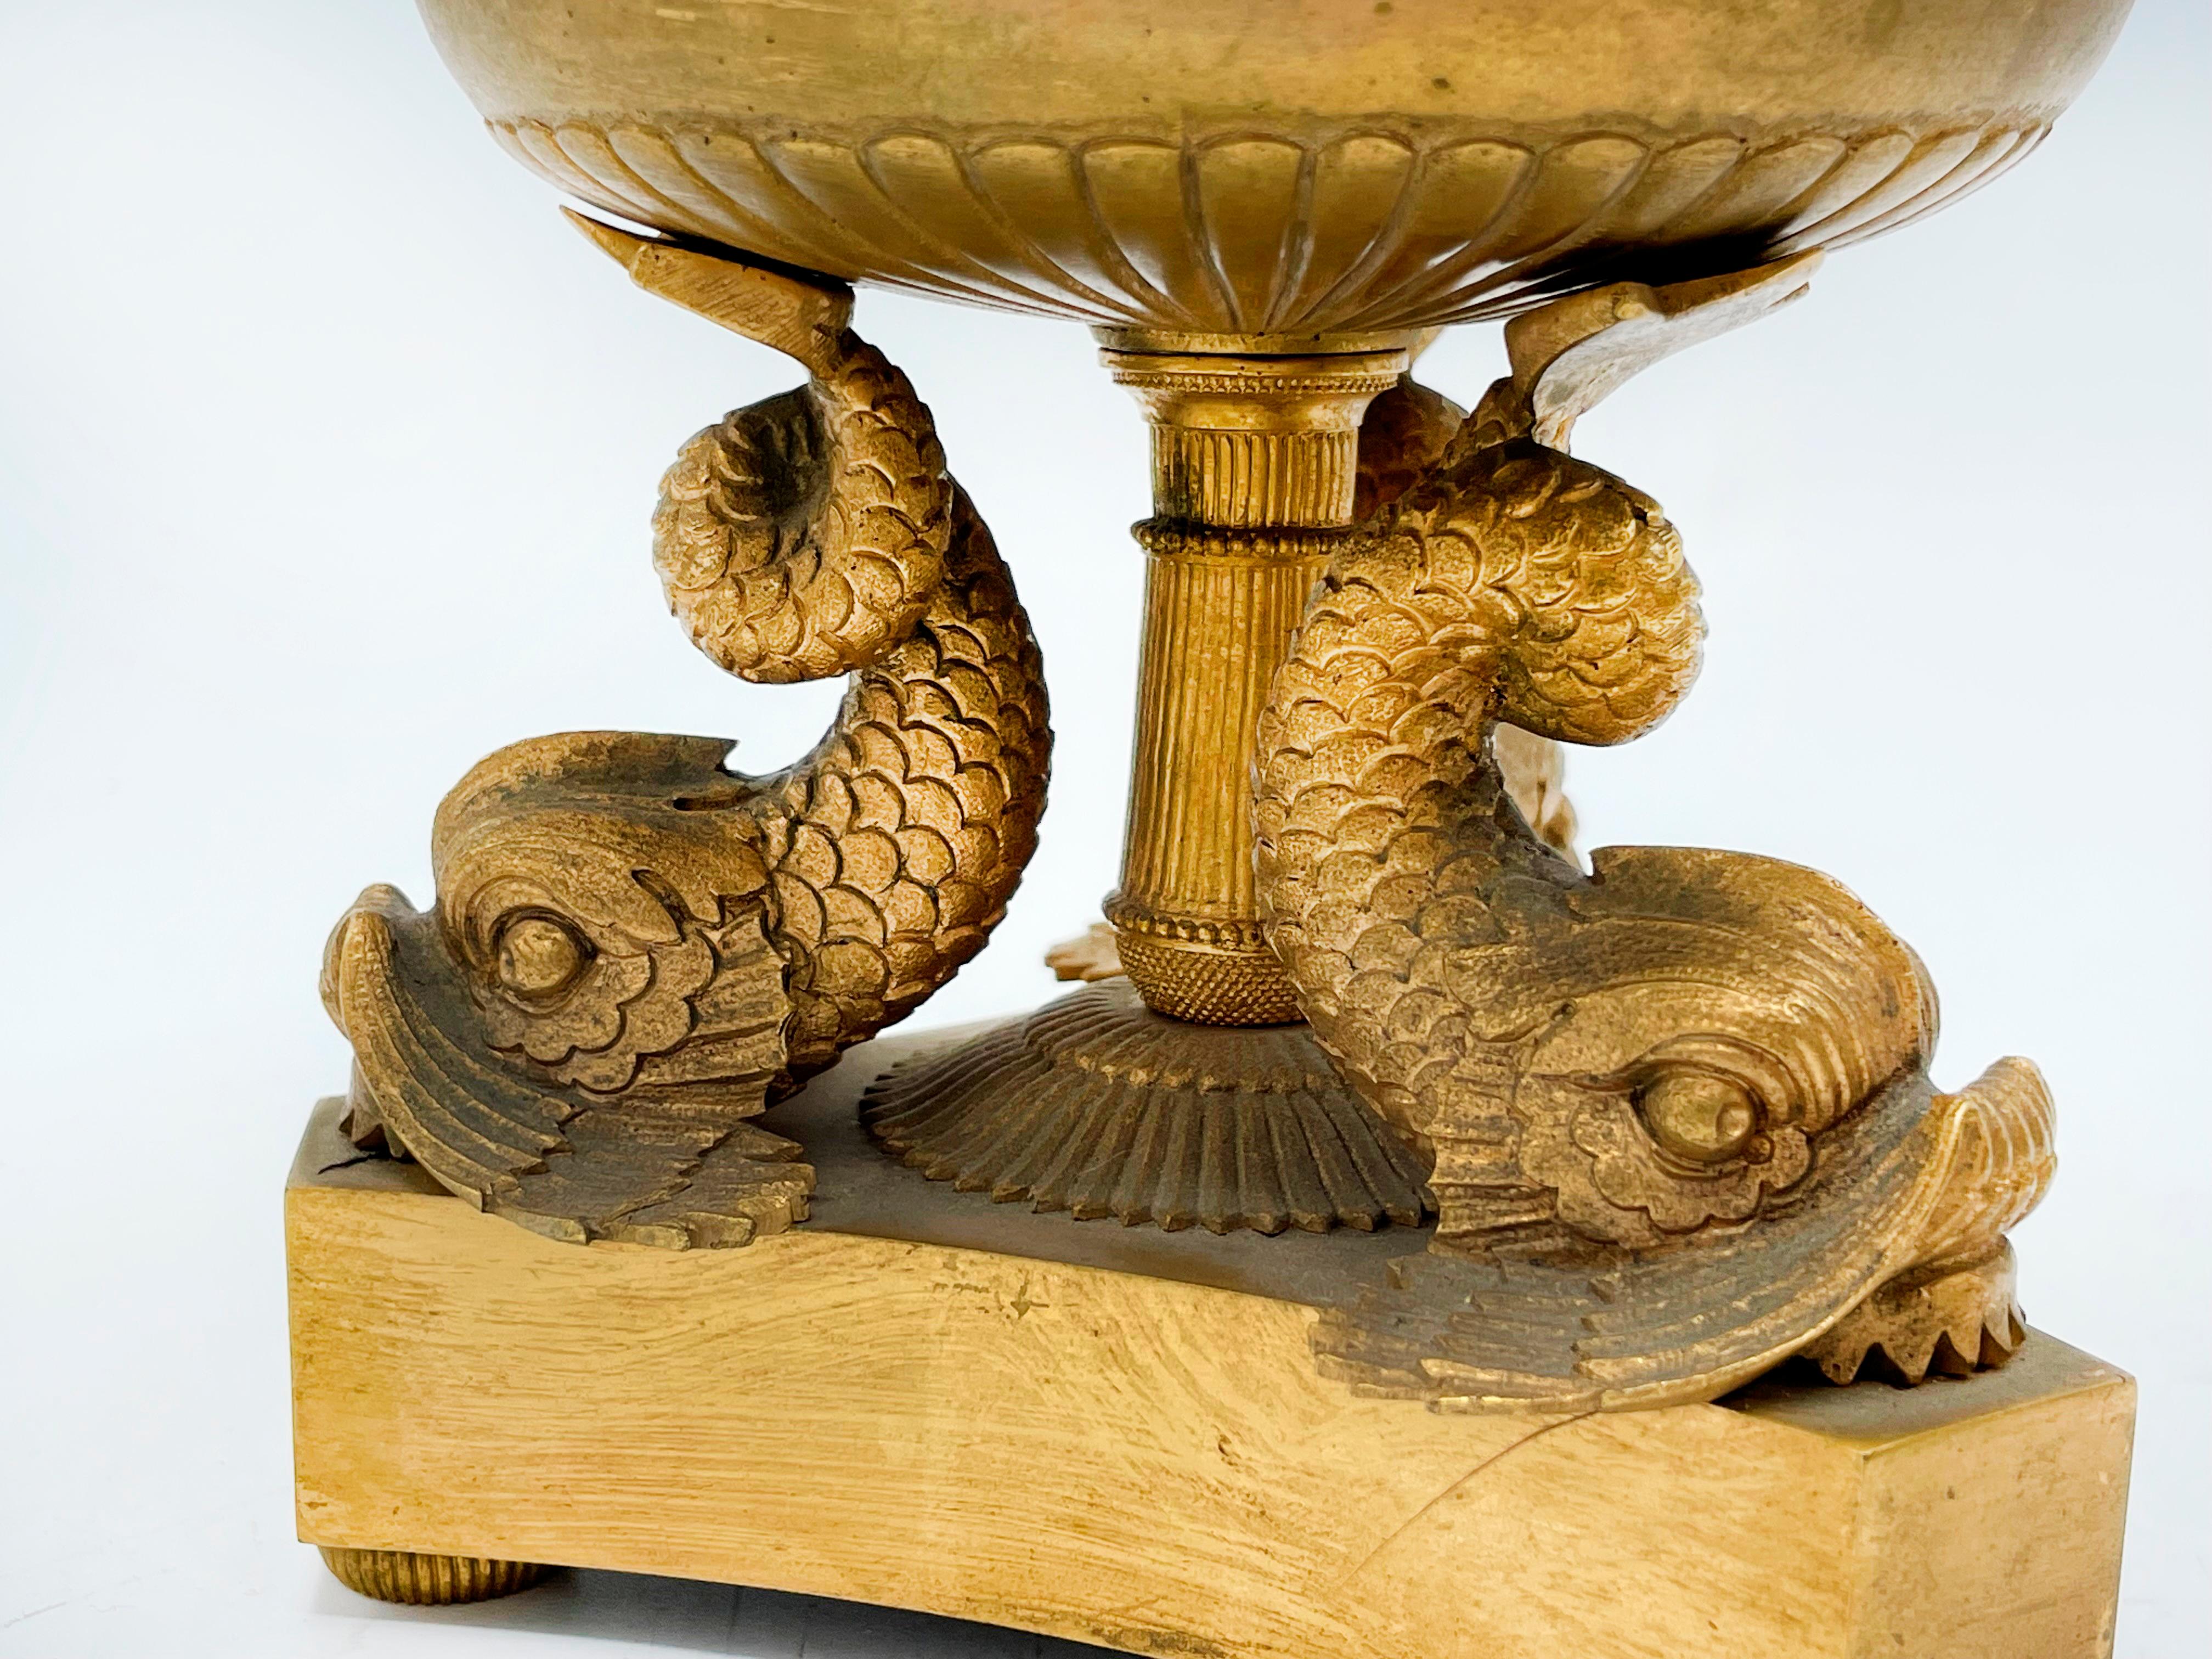 Elegant inkwell with lid in gold-patinated bronze
French Empire
Made in France during the Empire, circa 1820s with a very period design with stylized dolphins.

Wear consistent with age and use